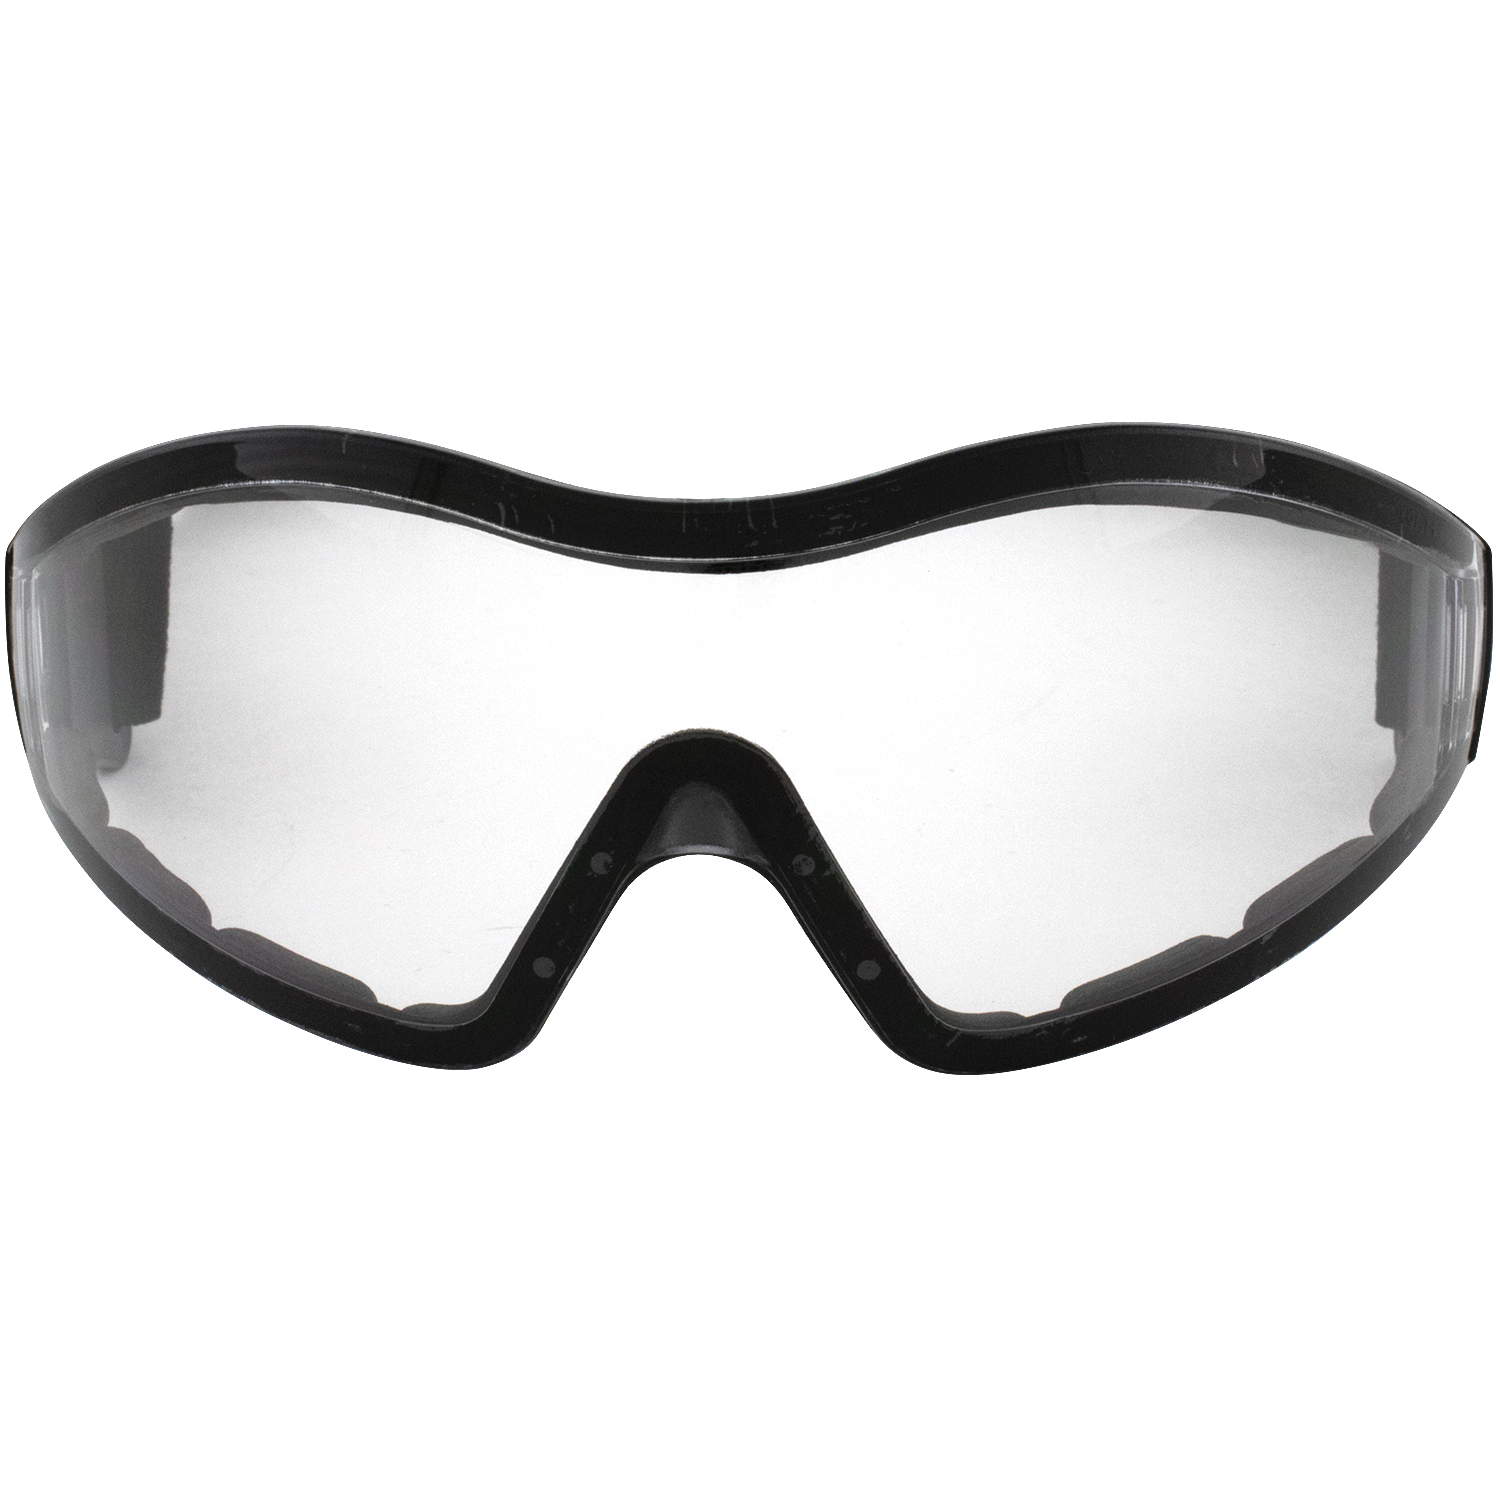 2 Pairs of Birdz Eyewear Boogie Foam Padded Motorcycle Ski Skydiving Z87.1 Safety Goggles Black Frames with Clear & Smoke Anti-Fog Lenses - image 2 of 7